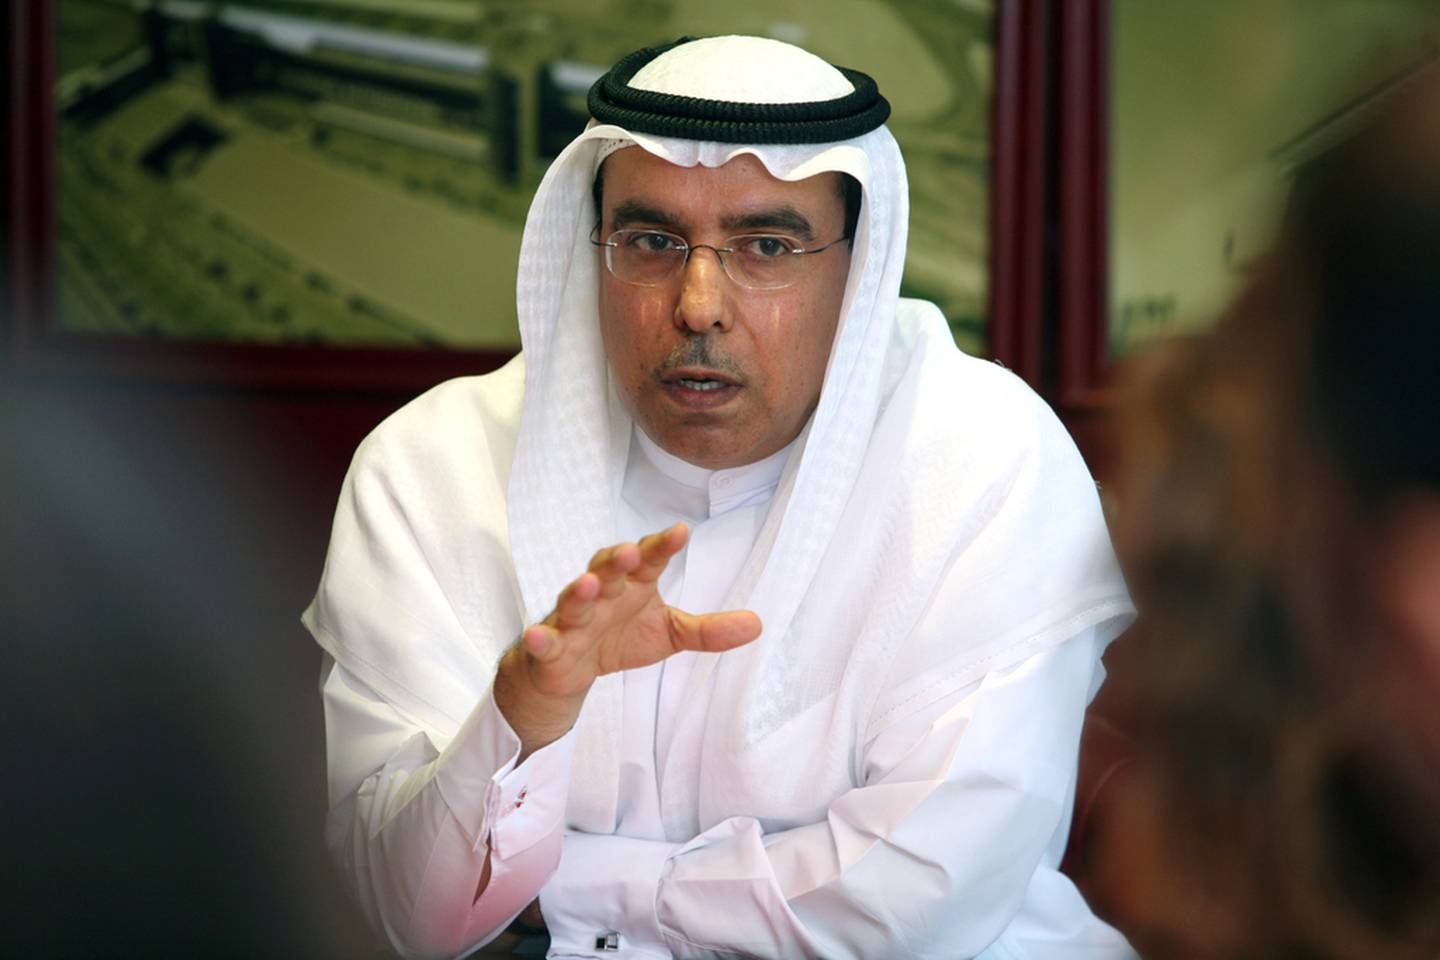 Khalid bin Kalban, chief executive of Dubai Investments, says demand for mixed-use property projects is very high in Ras Al Khaimah. Randi Sokoloff / The National